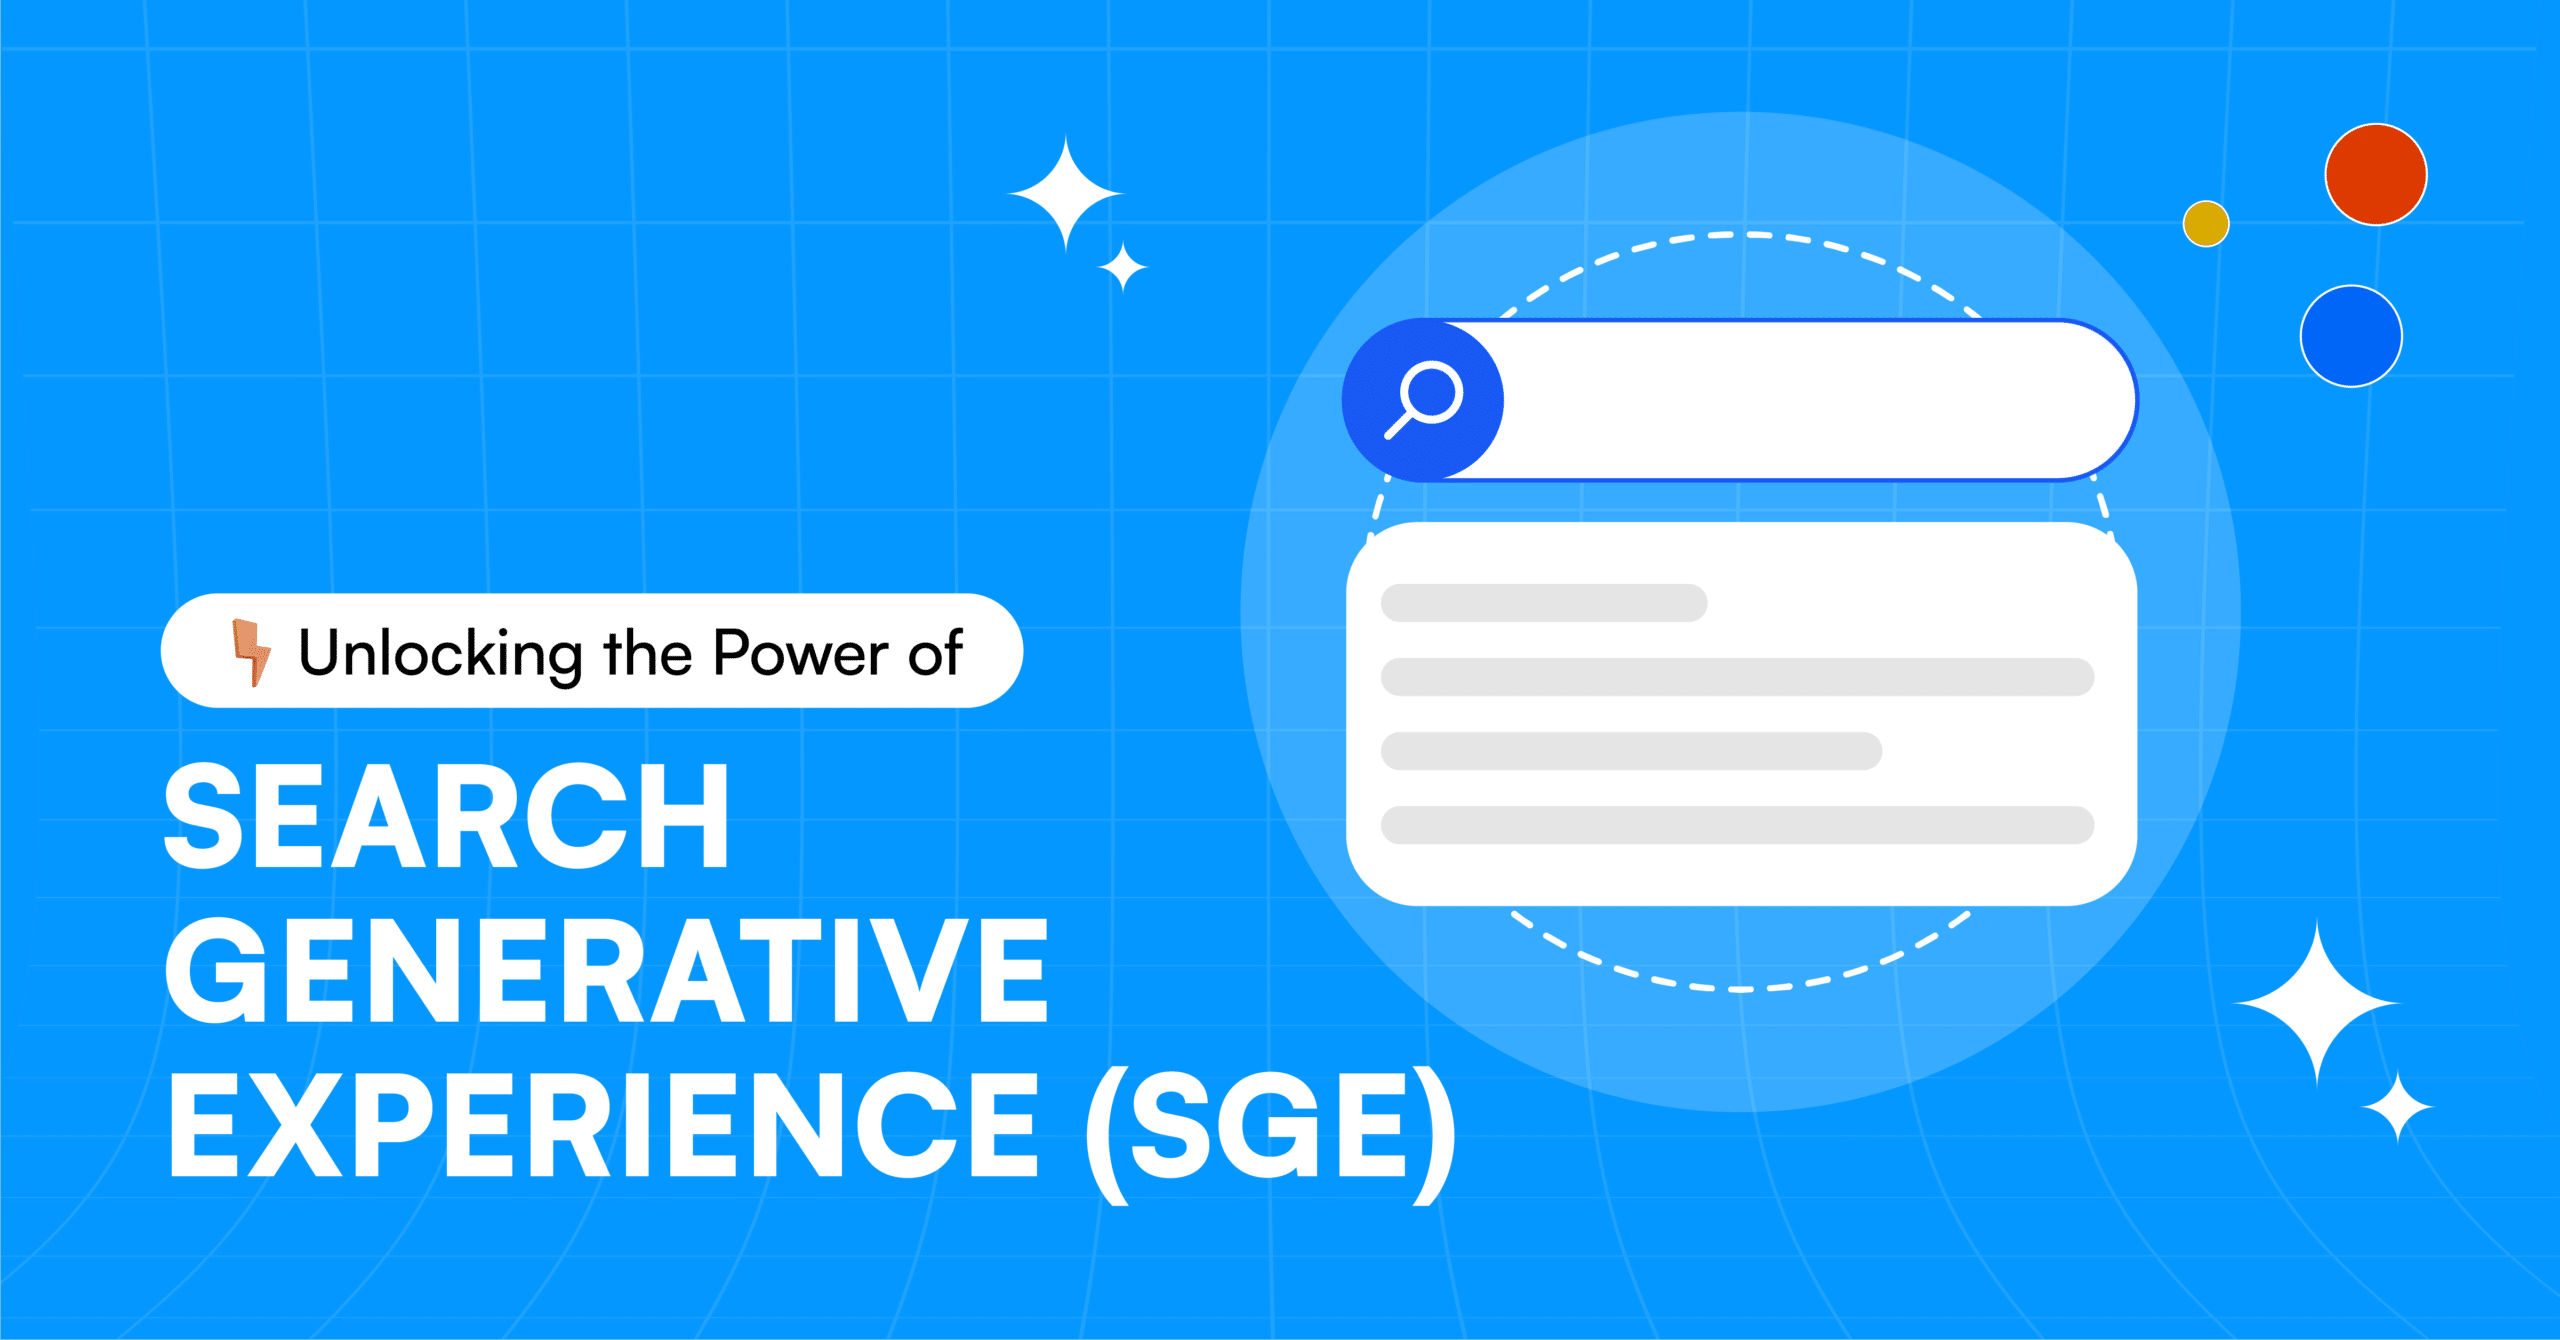 Unlocking the Power of Search Generative Experience (SGE)